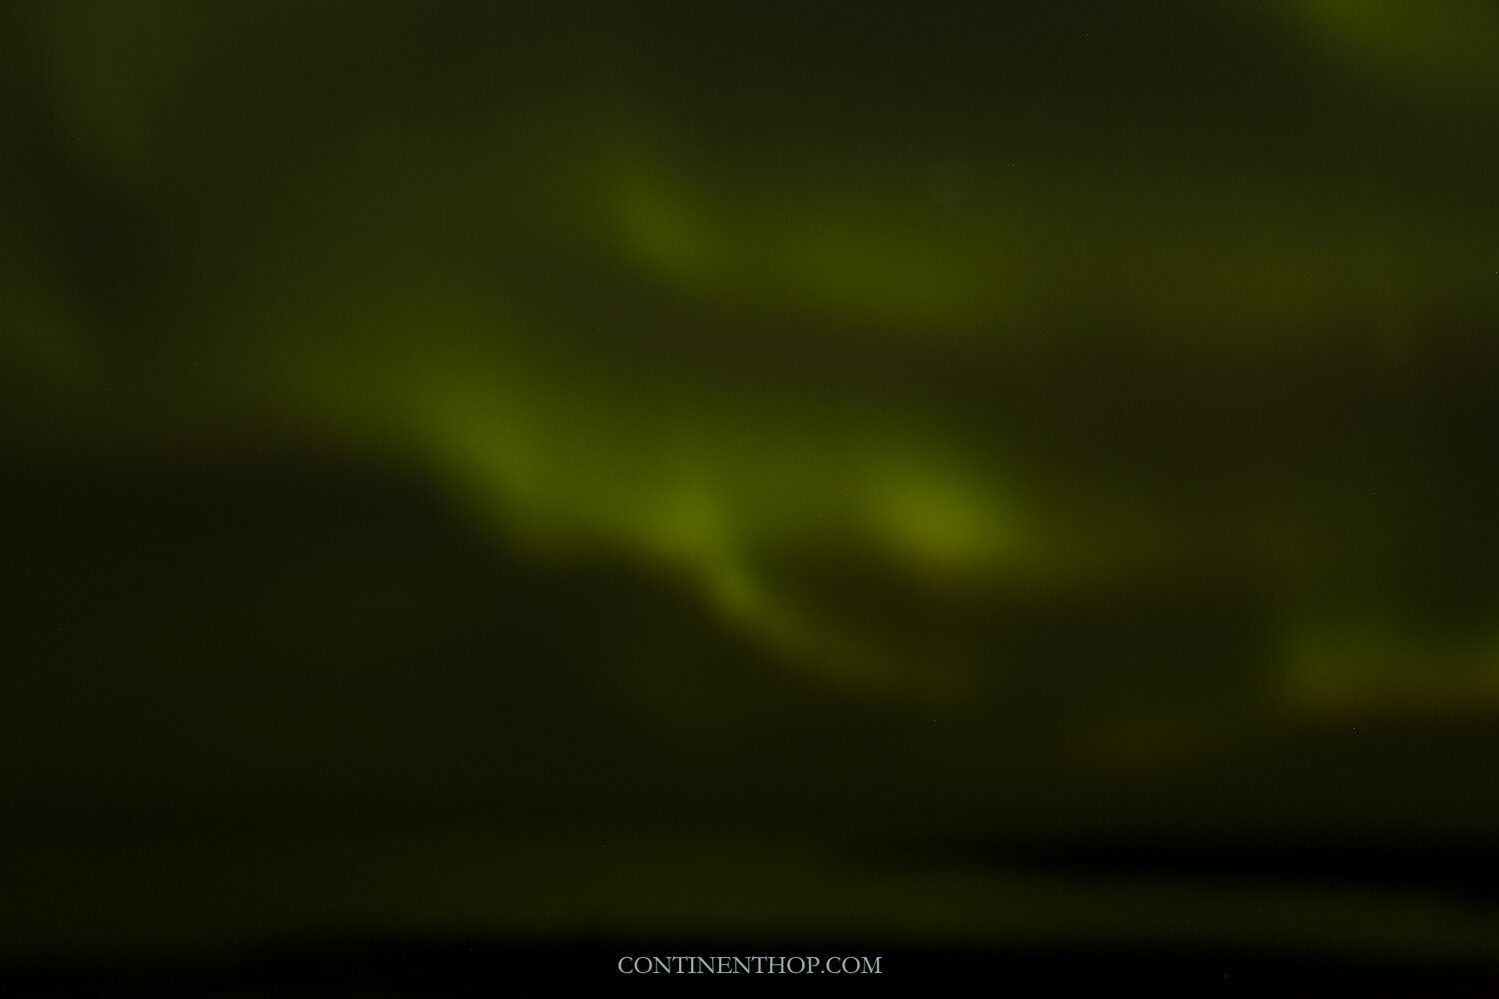 Northern lights in Iceland as seen on an Iceland 6 day itinerary